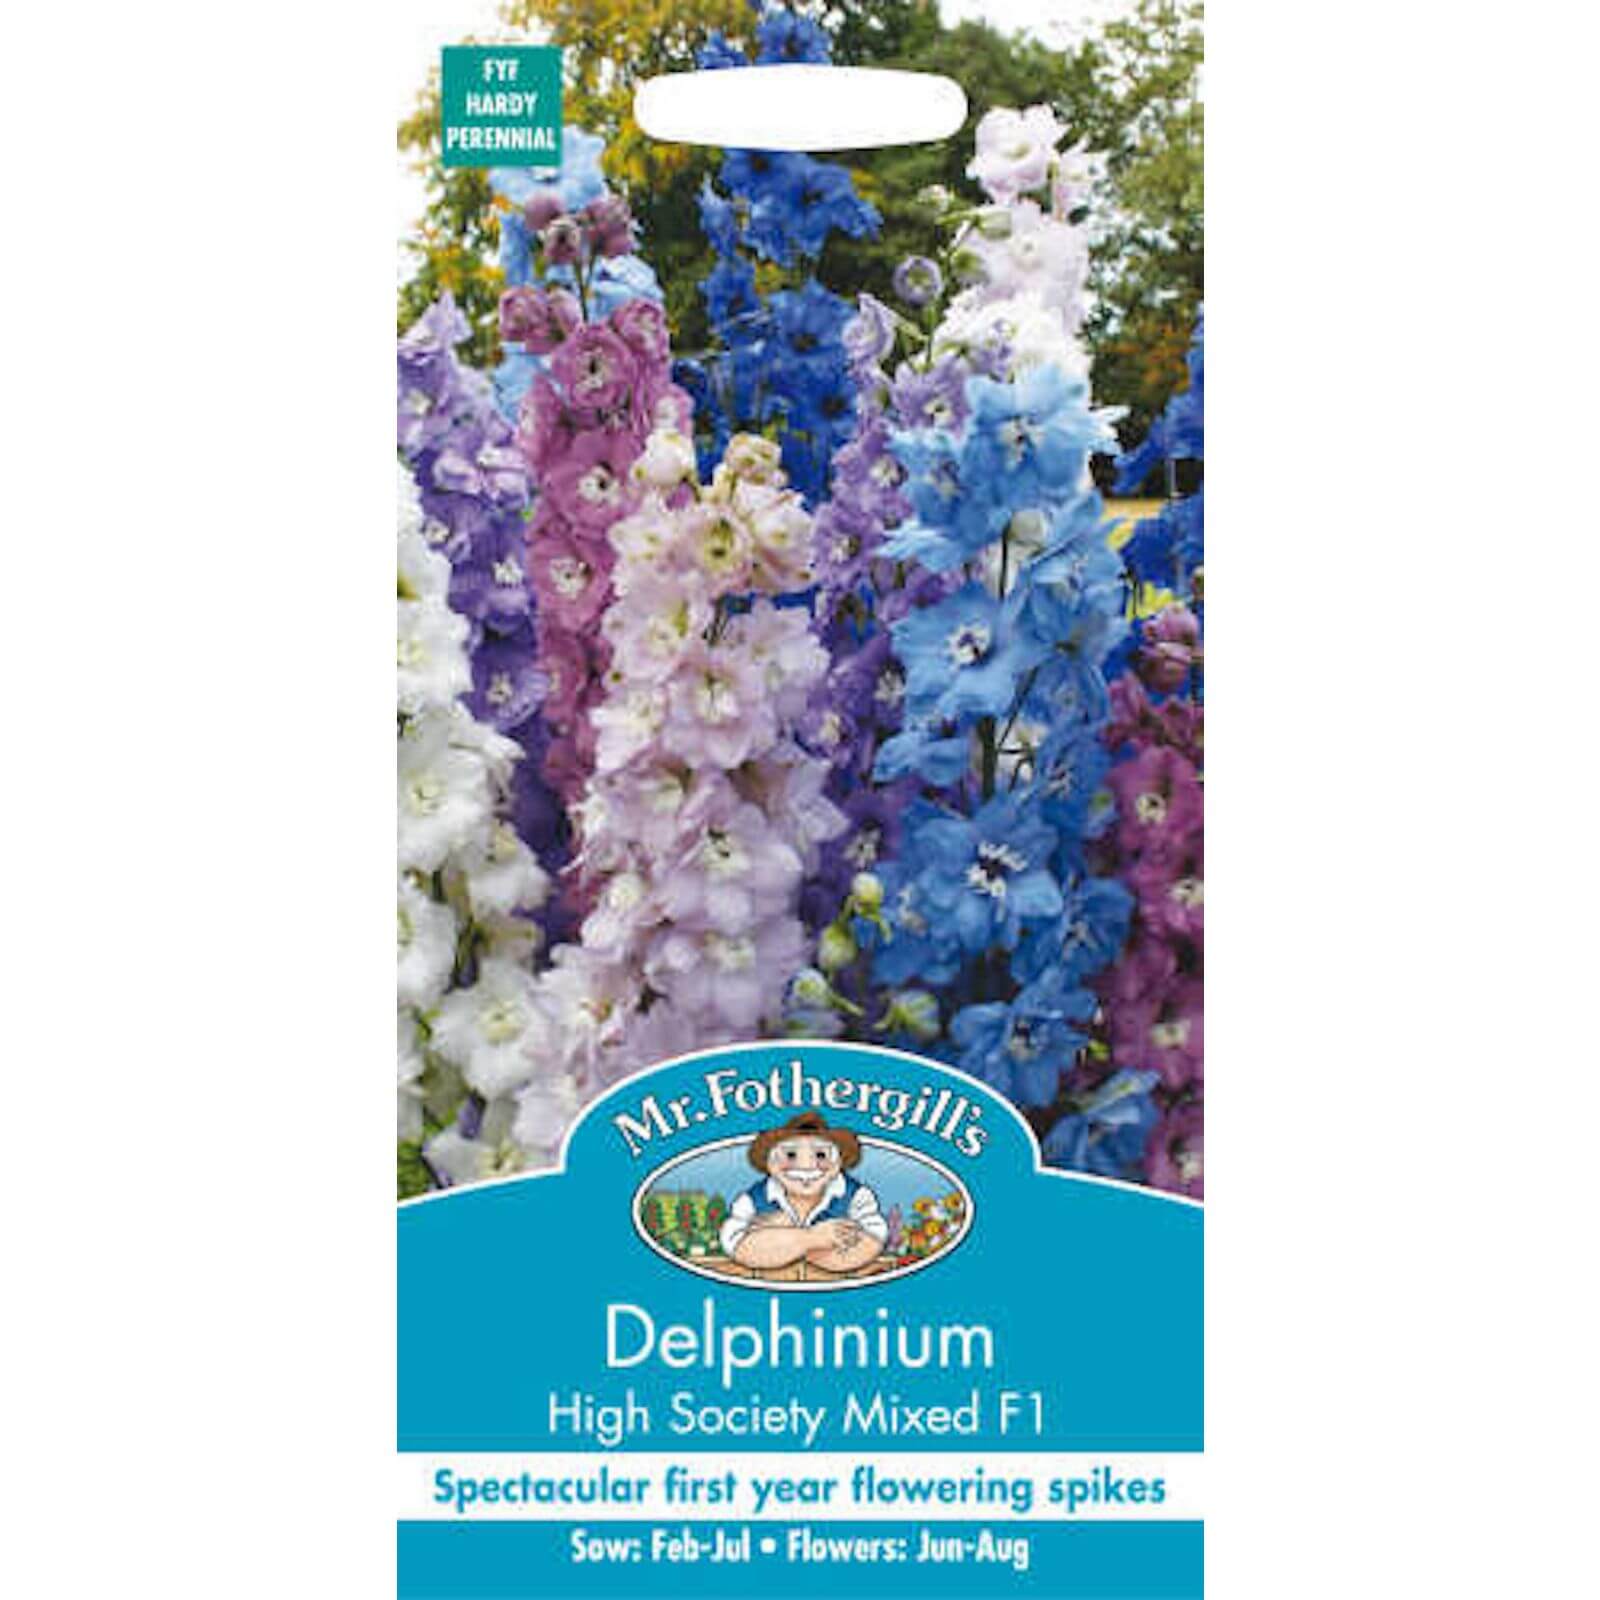 Mr. Fothergill's Delphinium High Society Mixed F1 Seeds